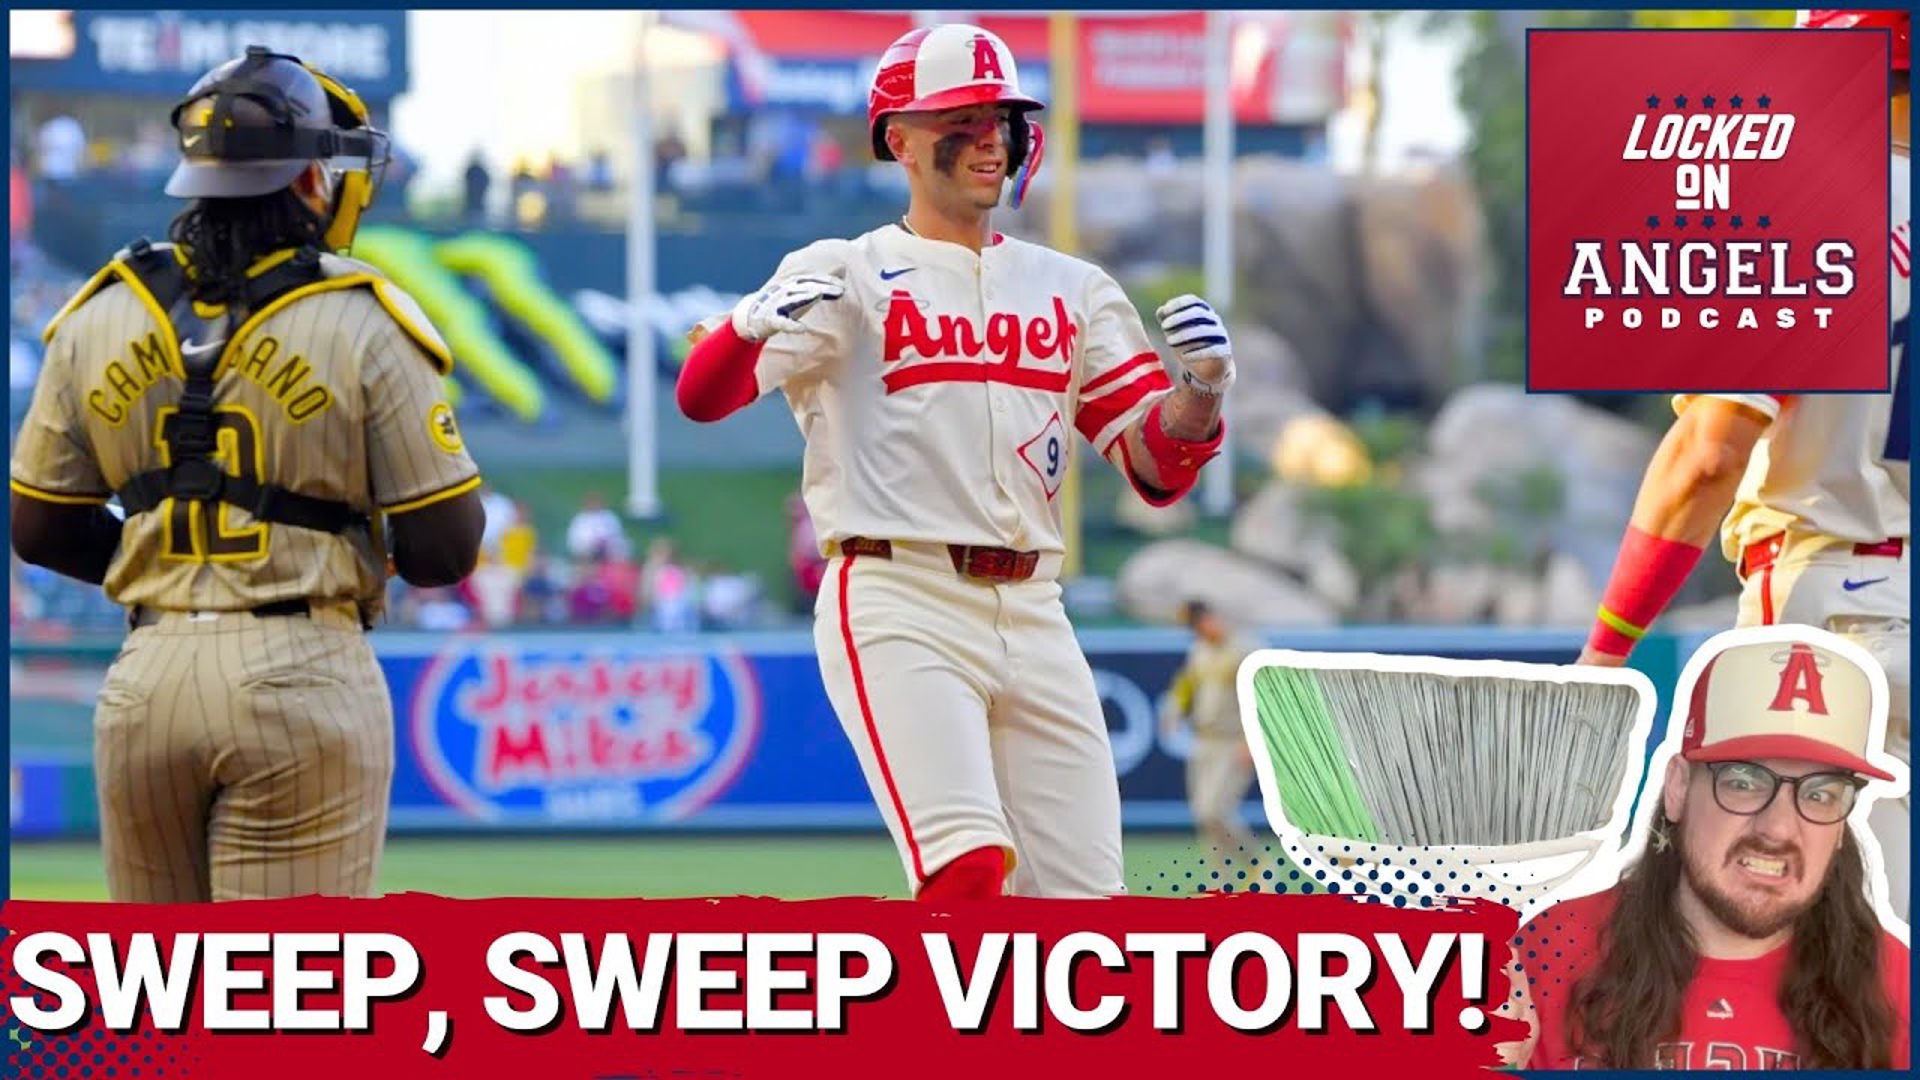 The Los Angeles Angels FINALLY completed a home sweep for the first time this season against the San Diego Padres, winning 3-2 on Wednesday night